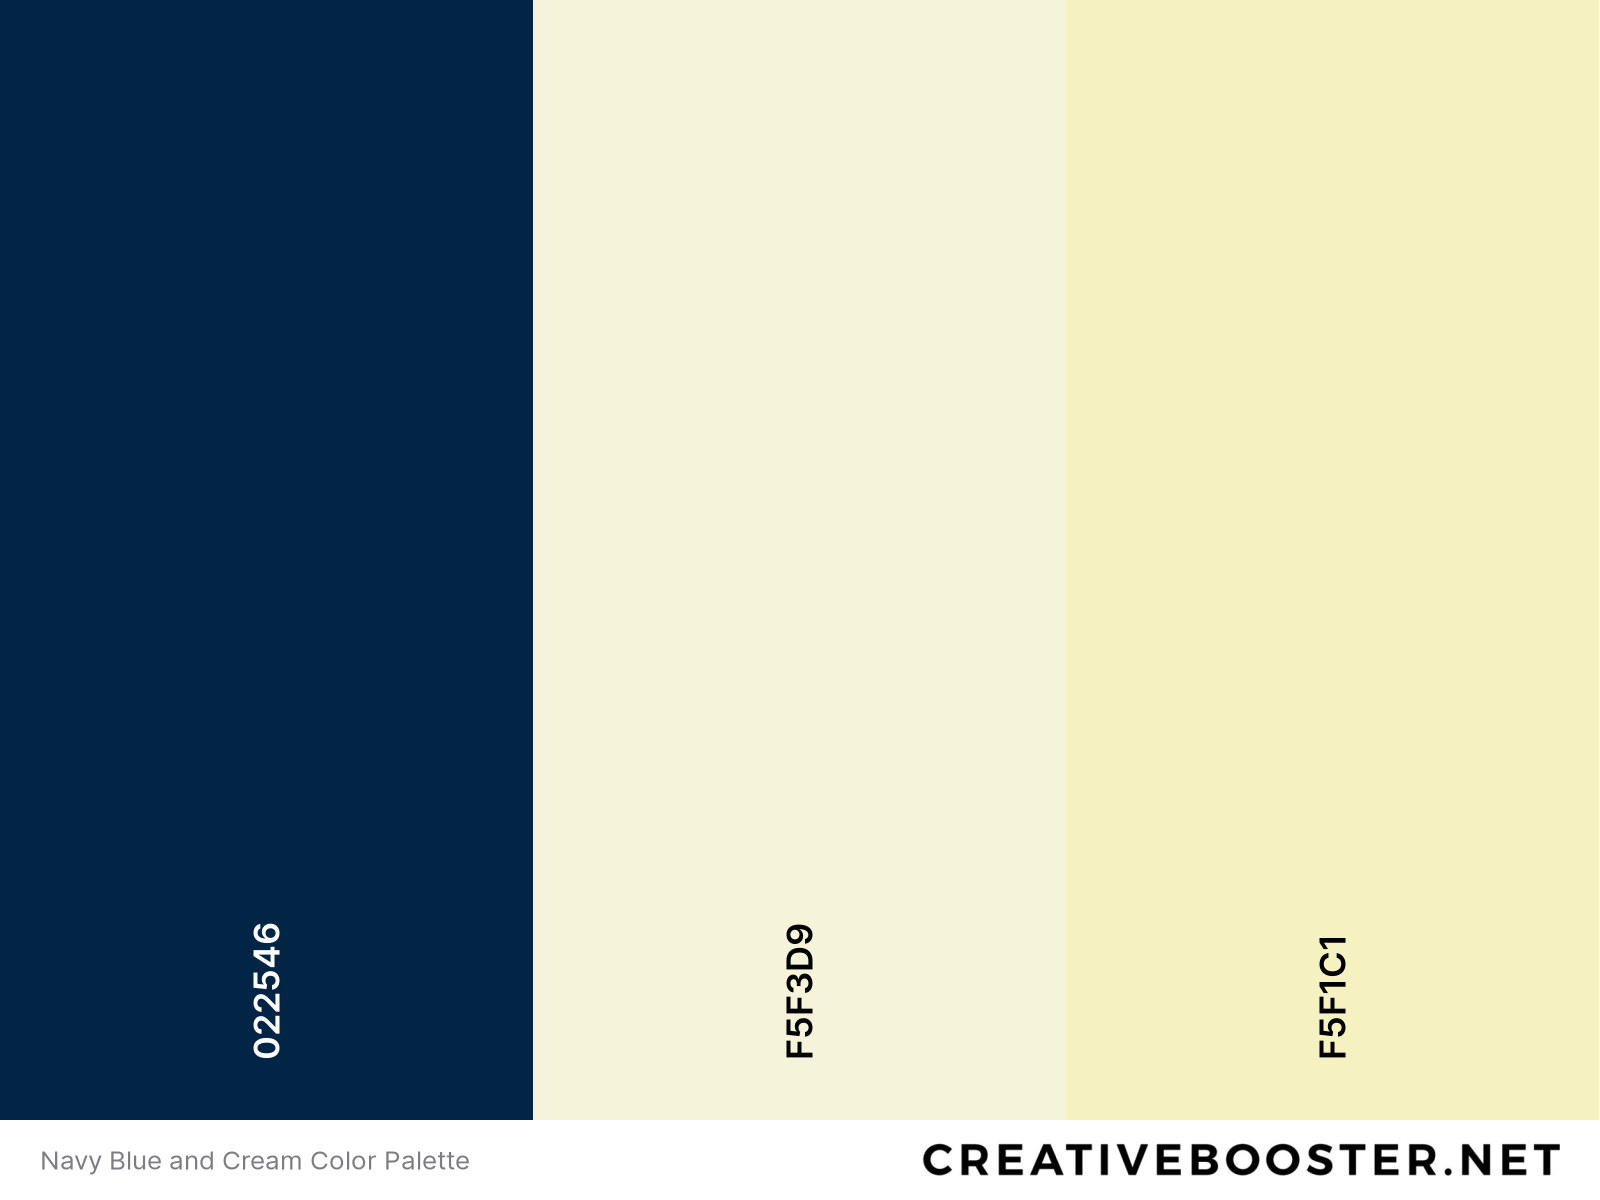 Navy Blue and Cream Color Palette